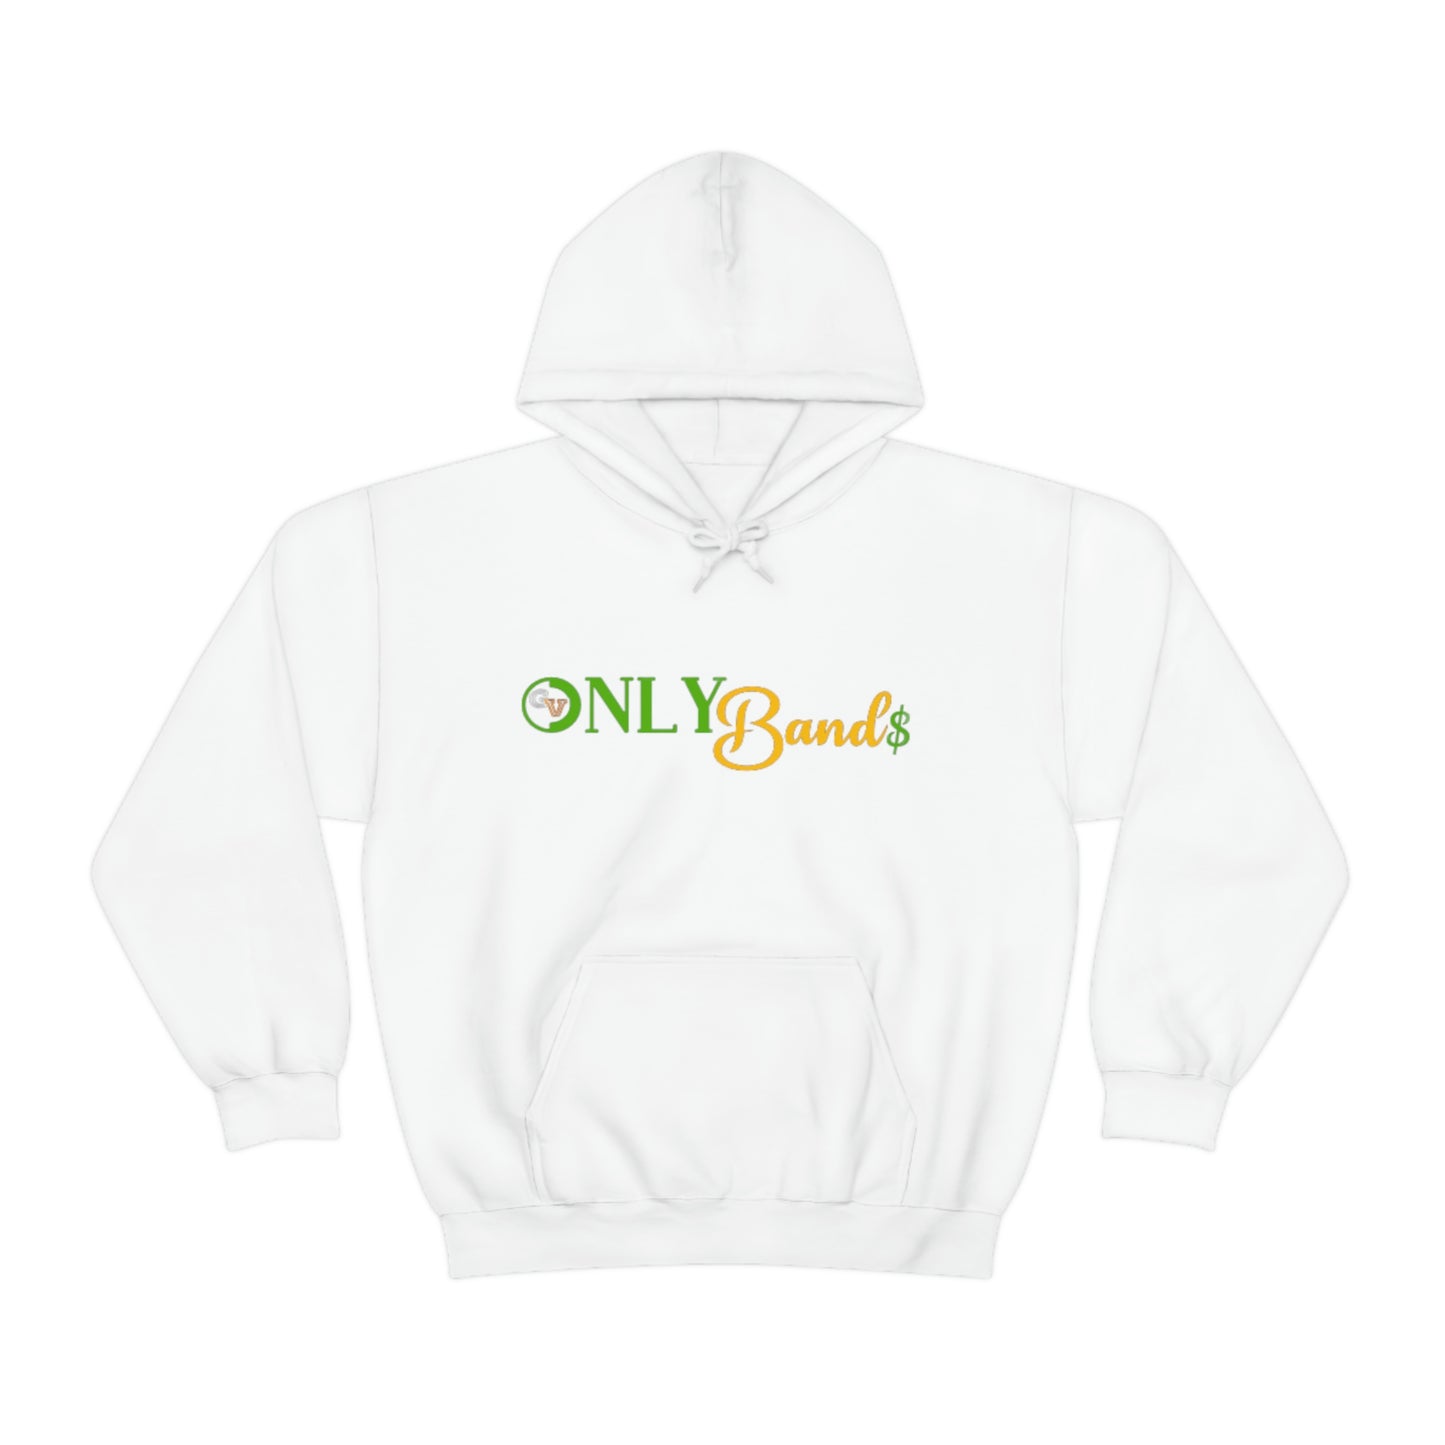 ONLY BANDS: Unisex Heavy Blend™ Hooded Sweatshirt